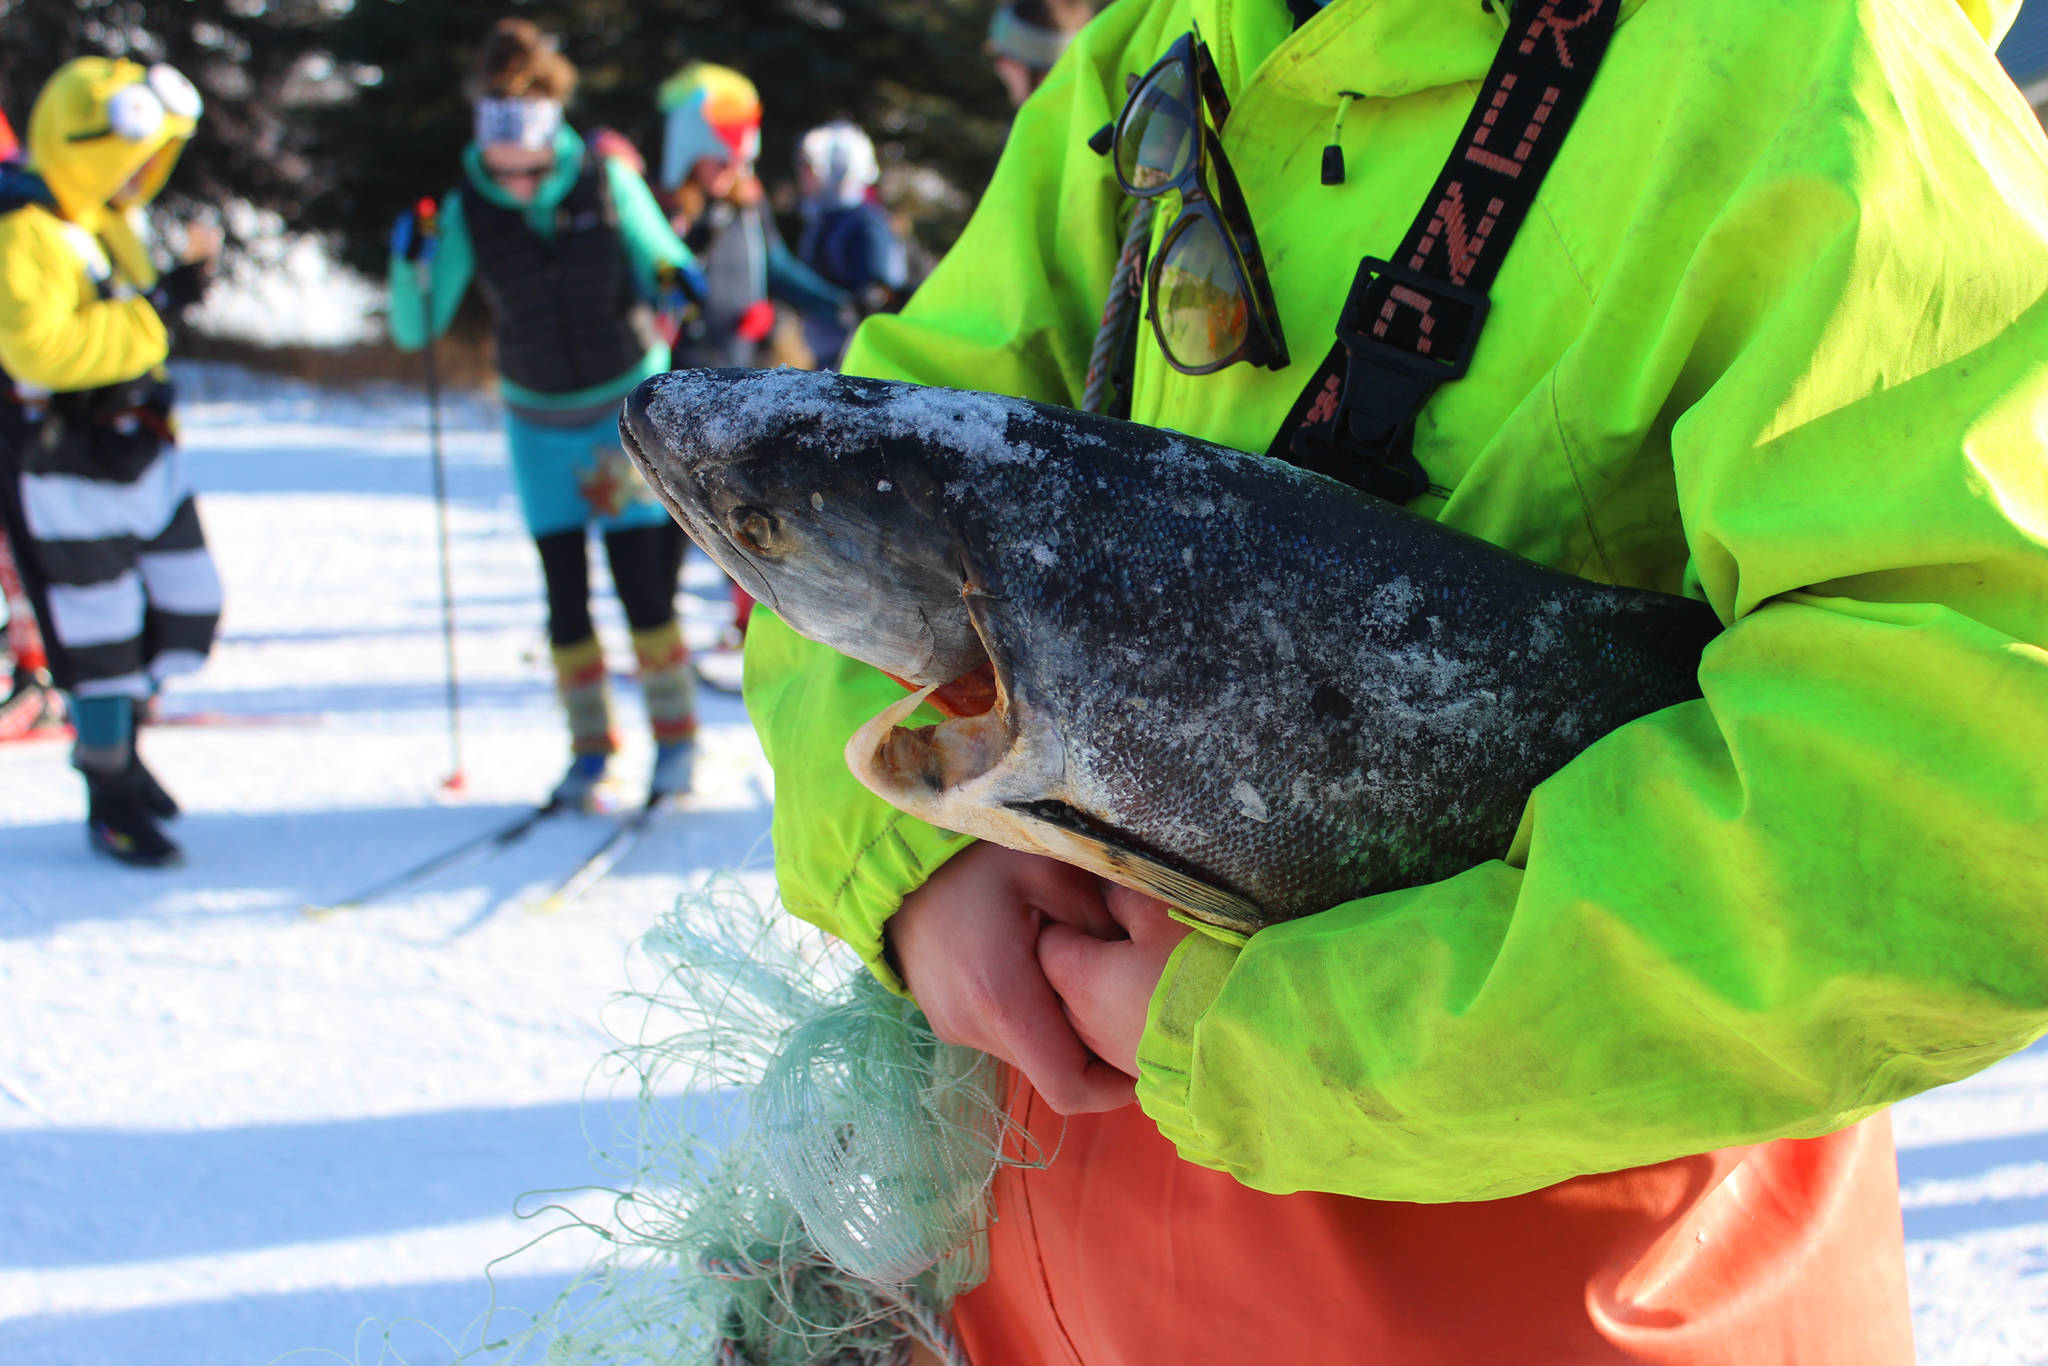 Claire Neaton holds a frozen salmon as part of the attached ensemble costume she and her friends wore to the 2018 Homer Ski for Women on Sunday, Feb. 4, 2018 at the Lookout Mountain Ski Trails. The ski is a fundraiser for Haven House, with prizes for the best costumes. (Photo by Megan Pacer/Homer News)